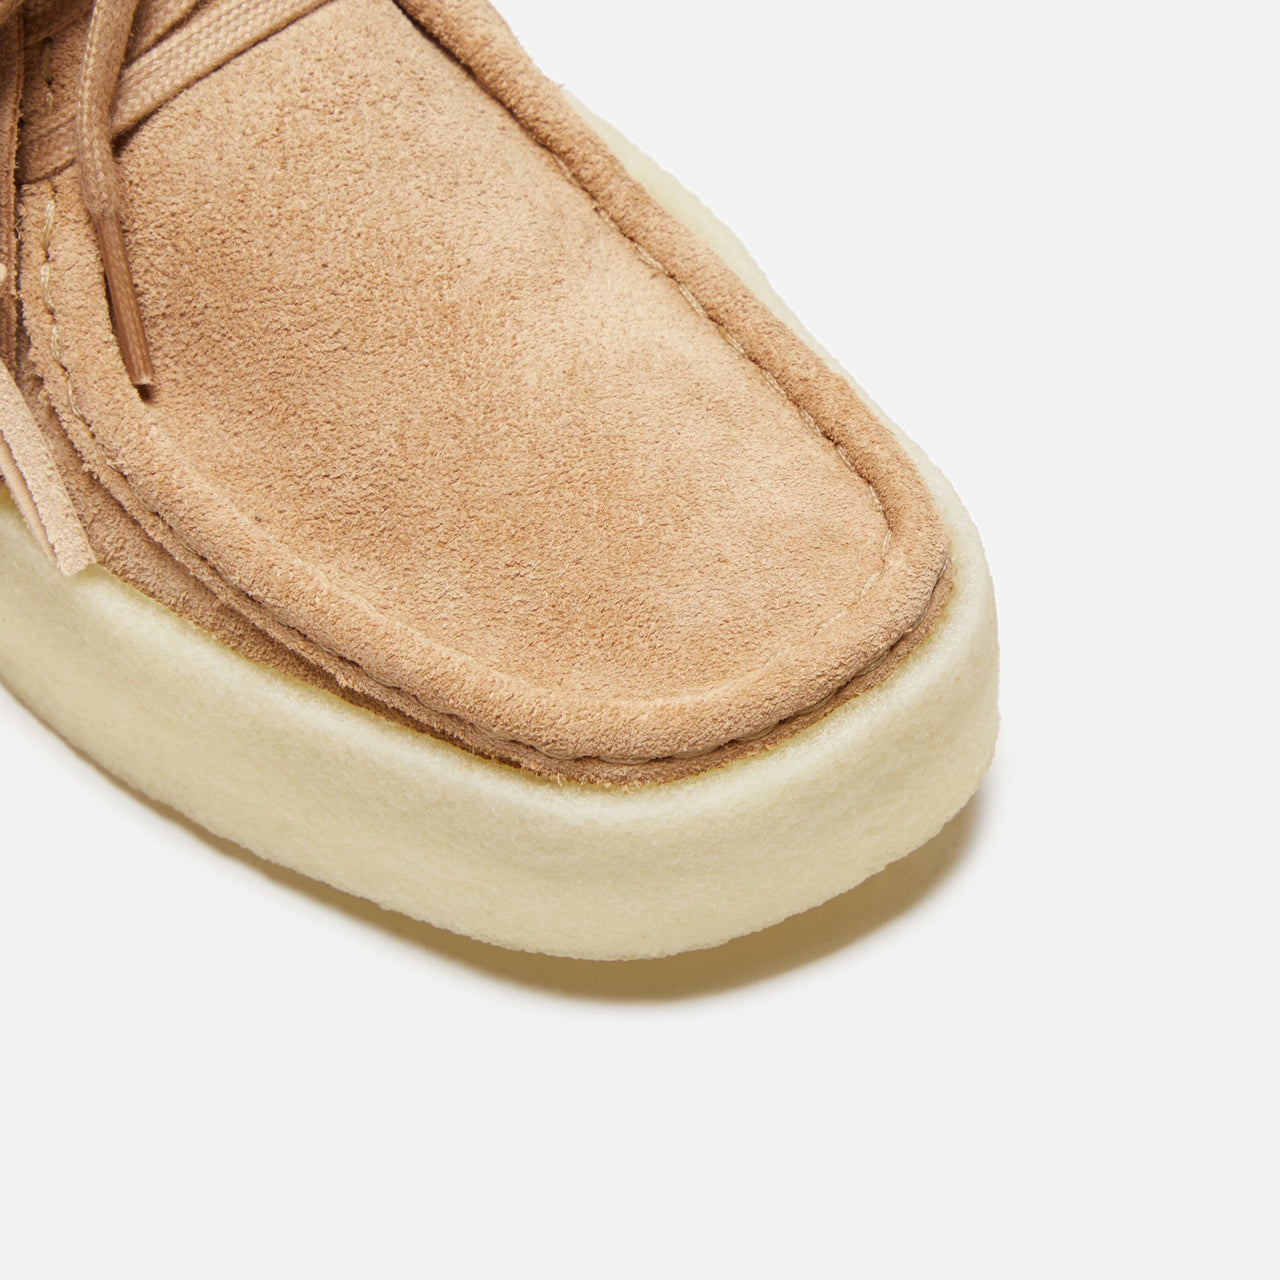 Side view of the Clarks Originals Wallabee Cup Women's Warm Beige Suede 261732524 shoes